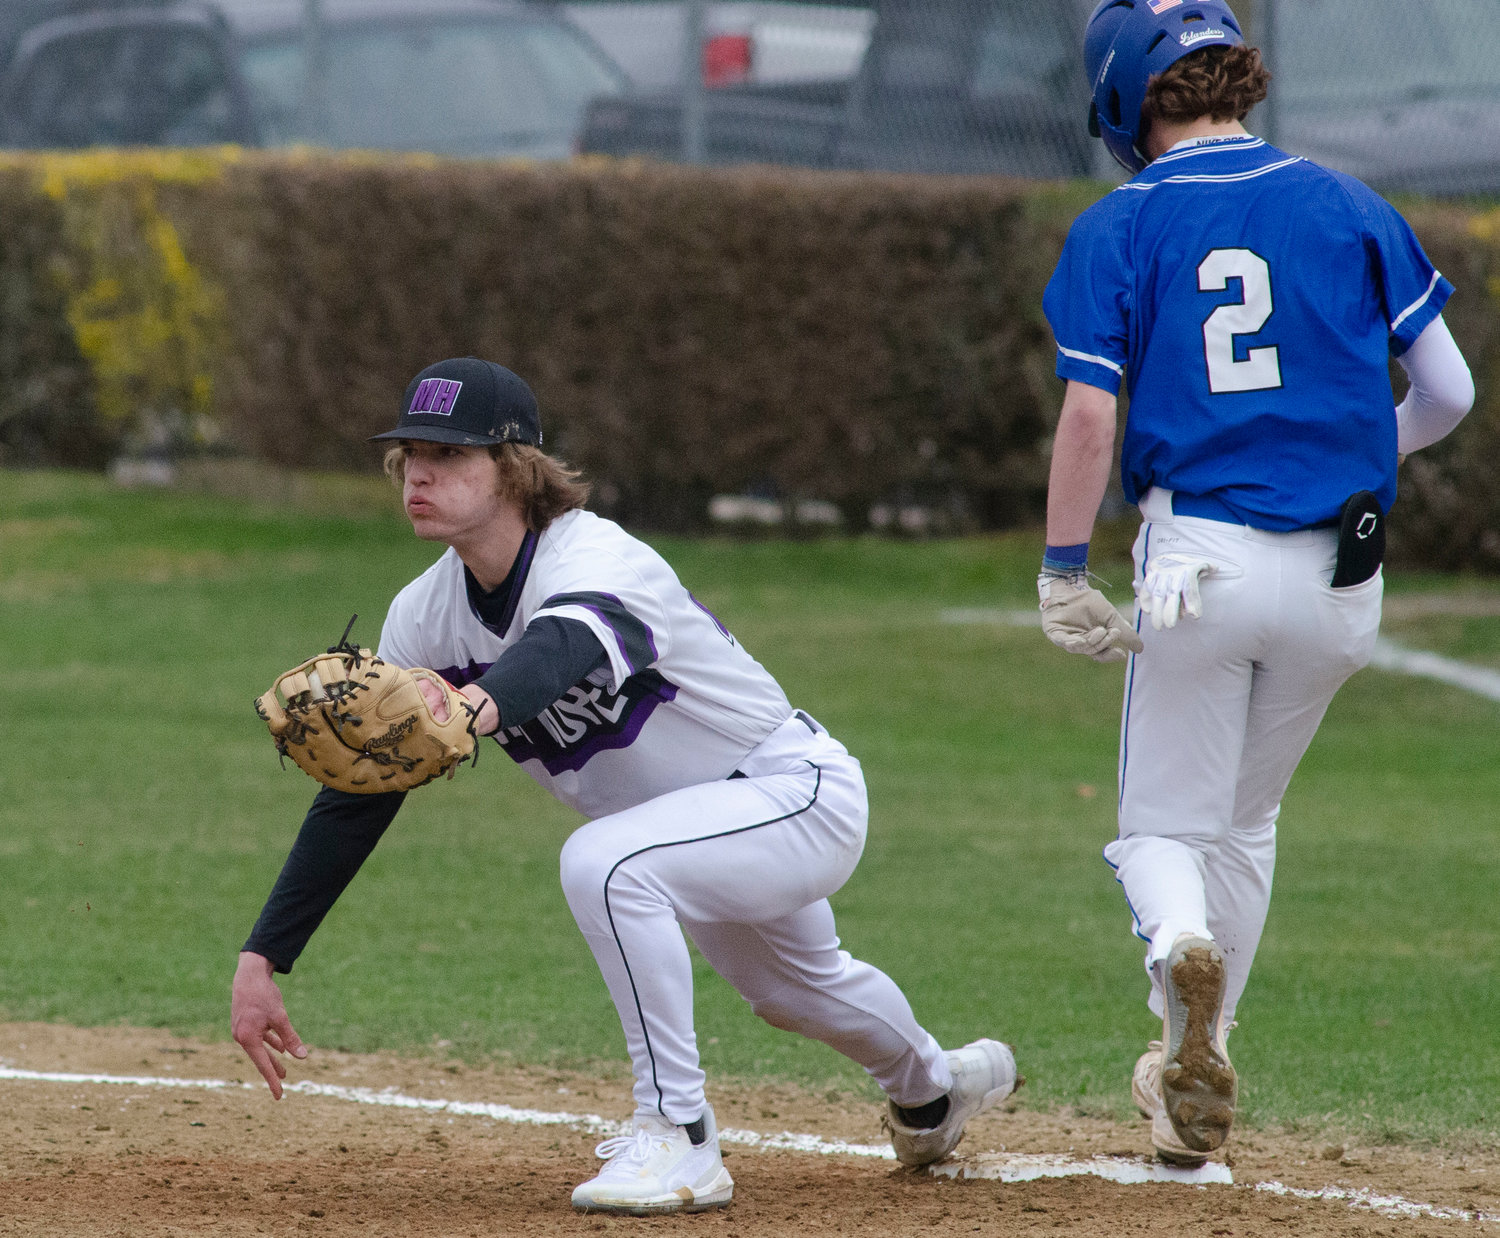 First baseman Brad Denson snares a throw from Parker Camelo to record an out at first base in the team's second game against Middletown at Guiteras Field.